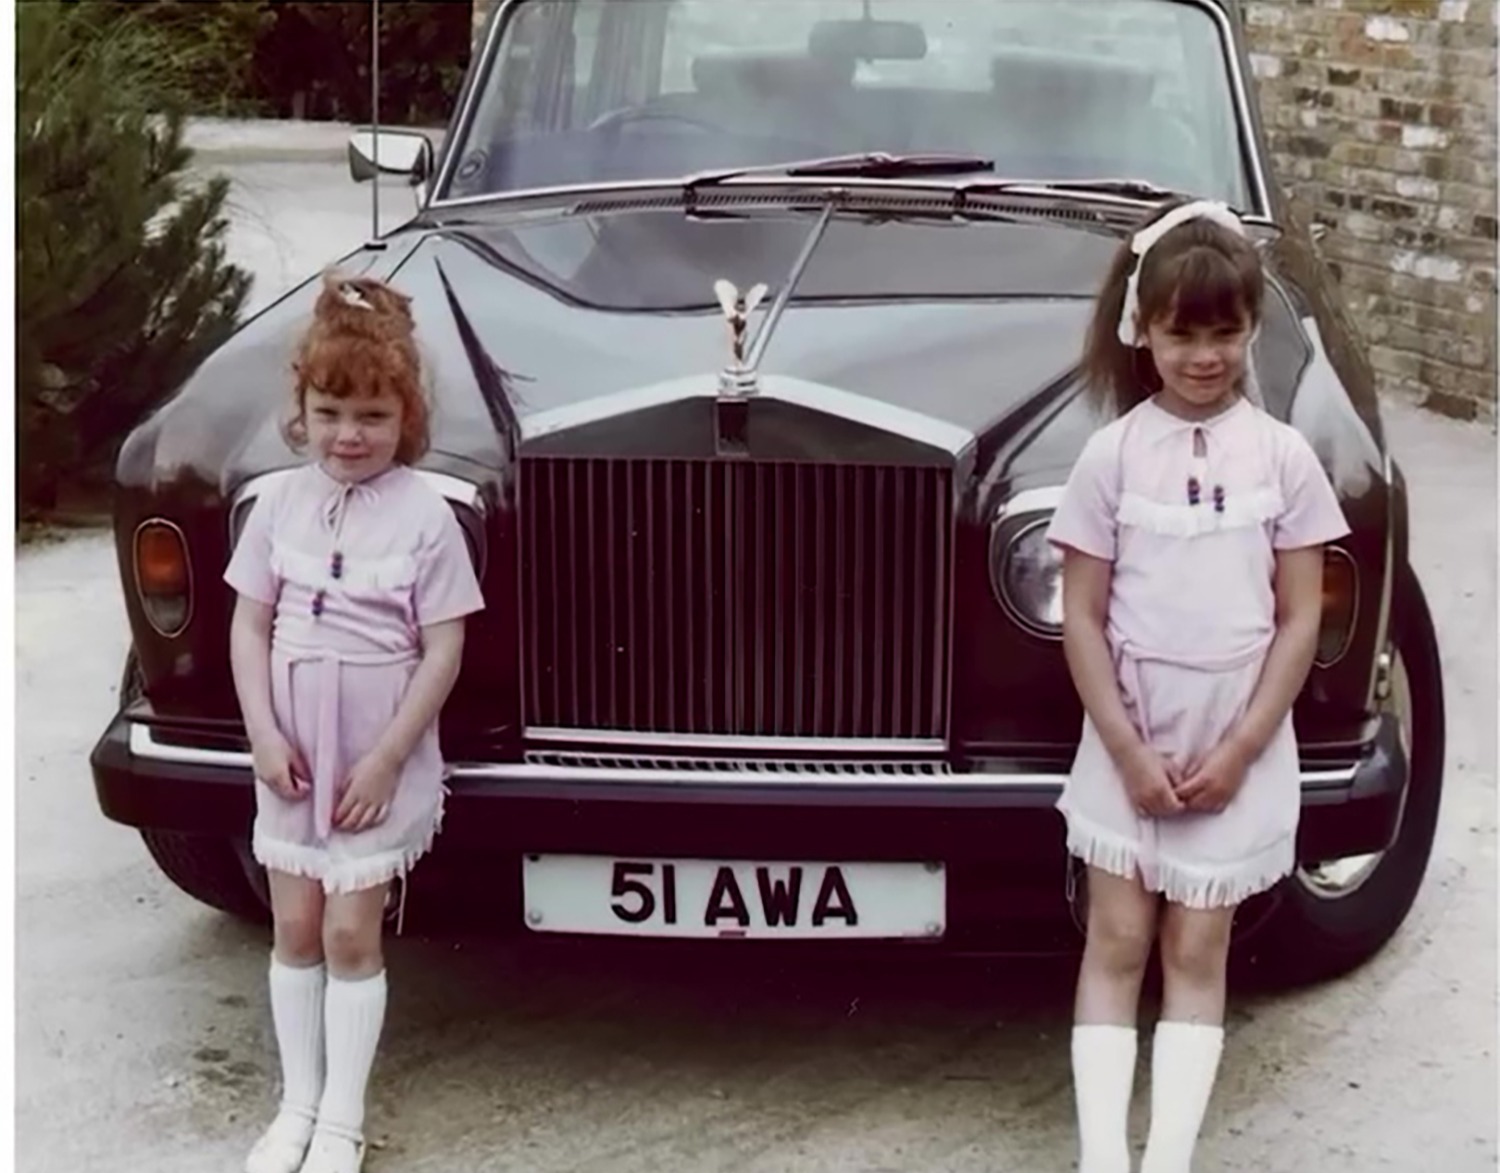 David Beckham posted a pic of Posh and sister Louise in front of their dad’s Rolls-Royce